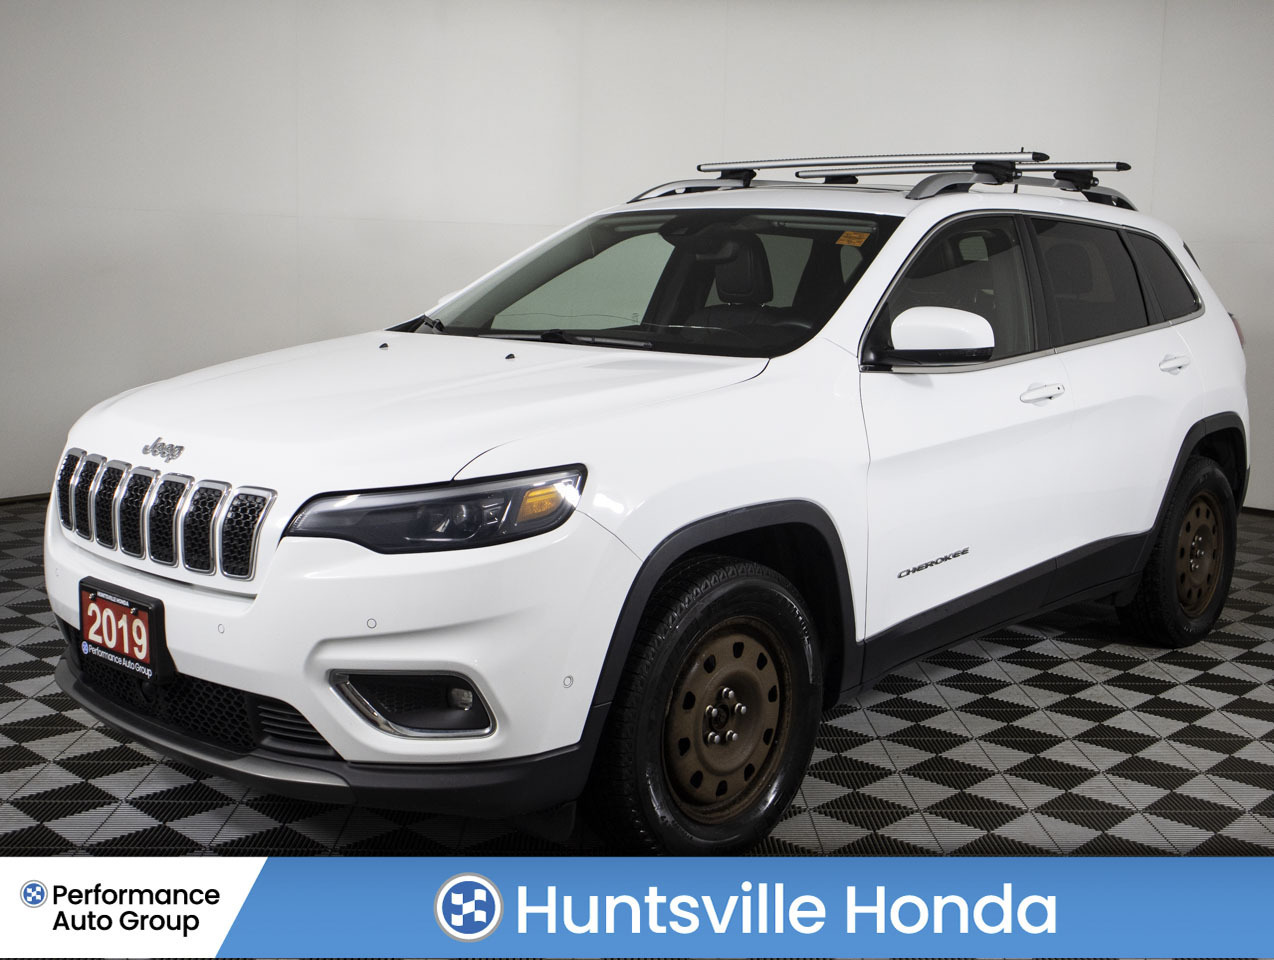 2019 Jeep Cherokee Limited-3.2L-4WD- Leather-Navigation- Remote Start